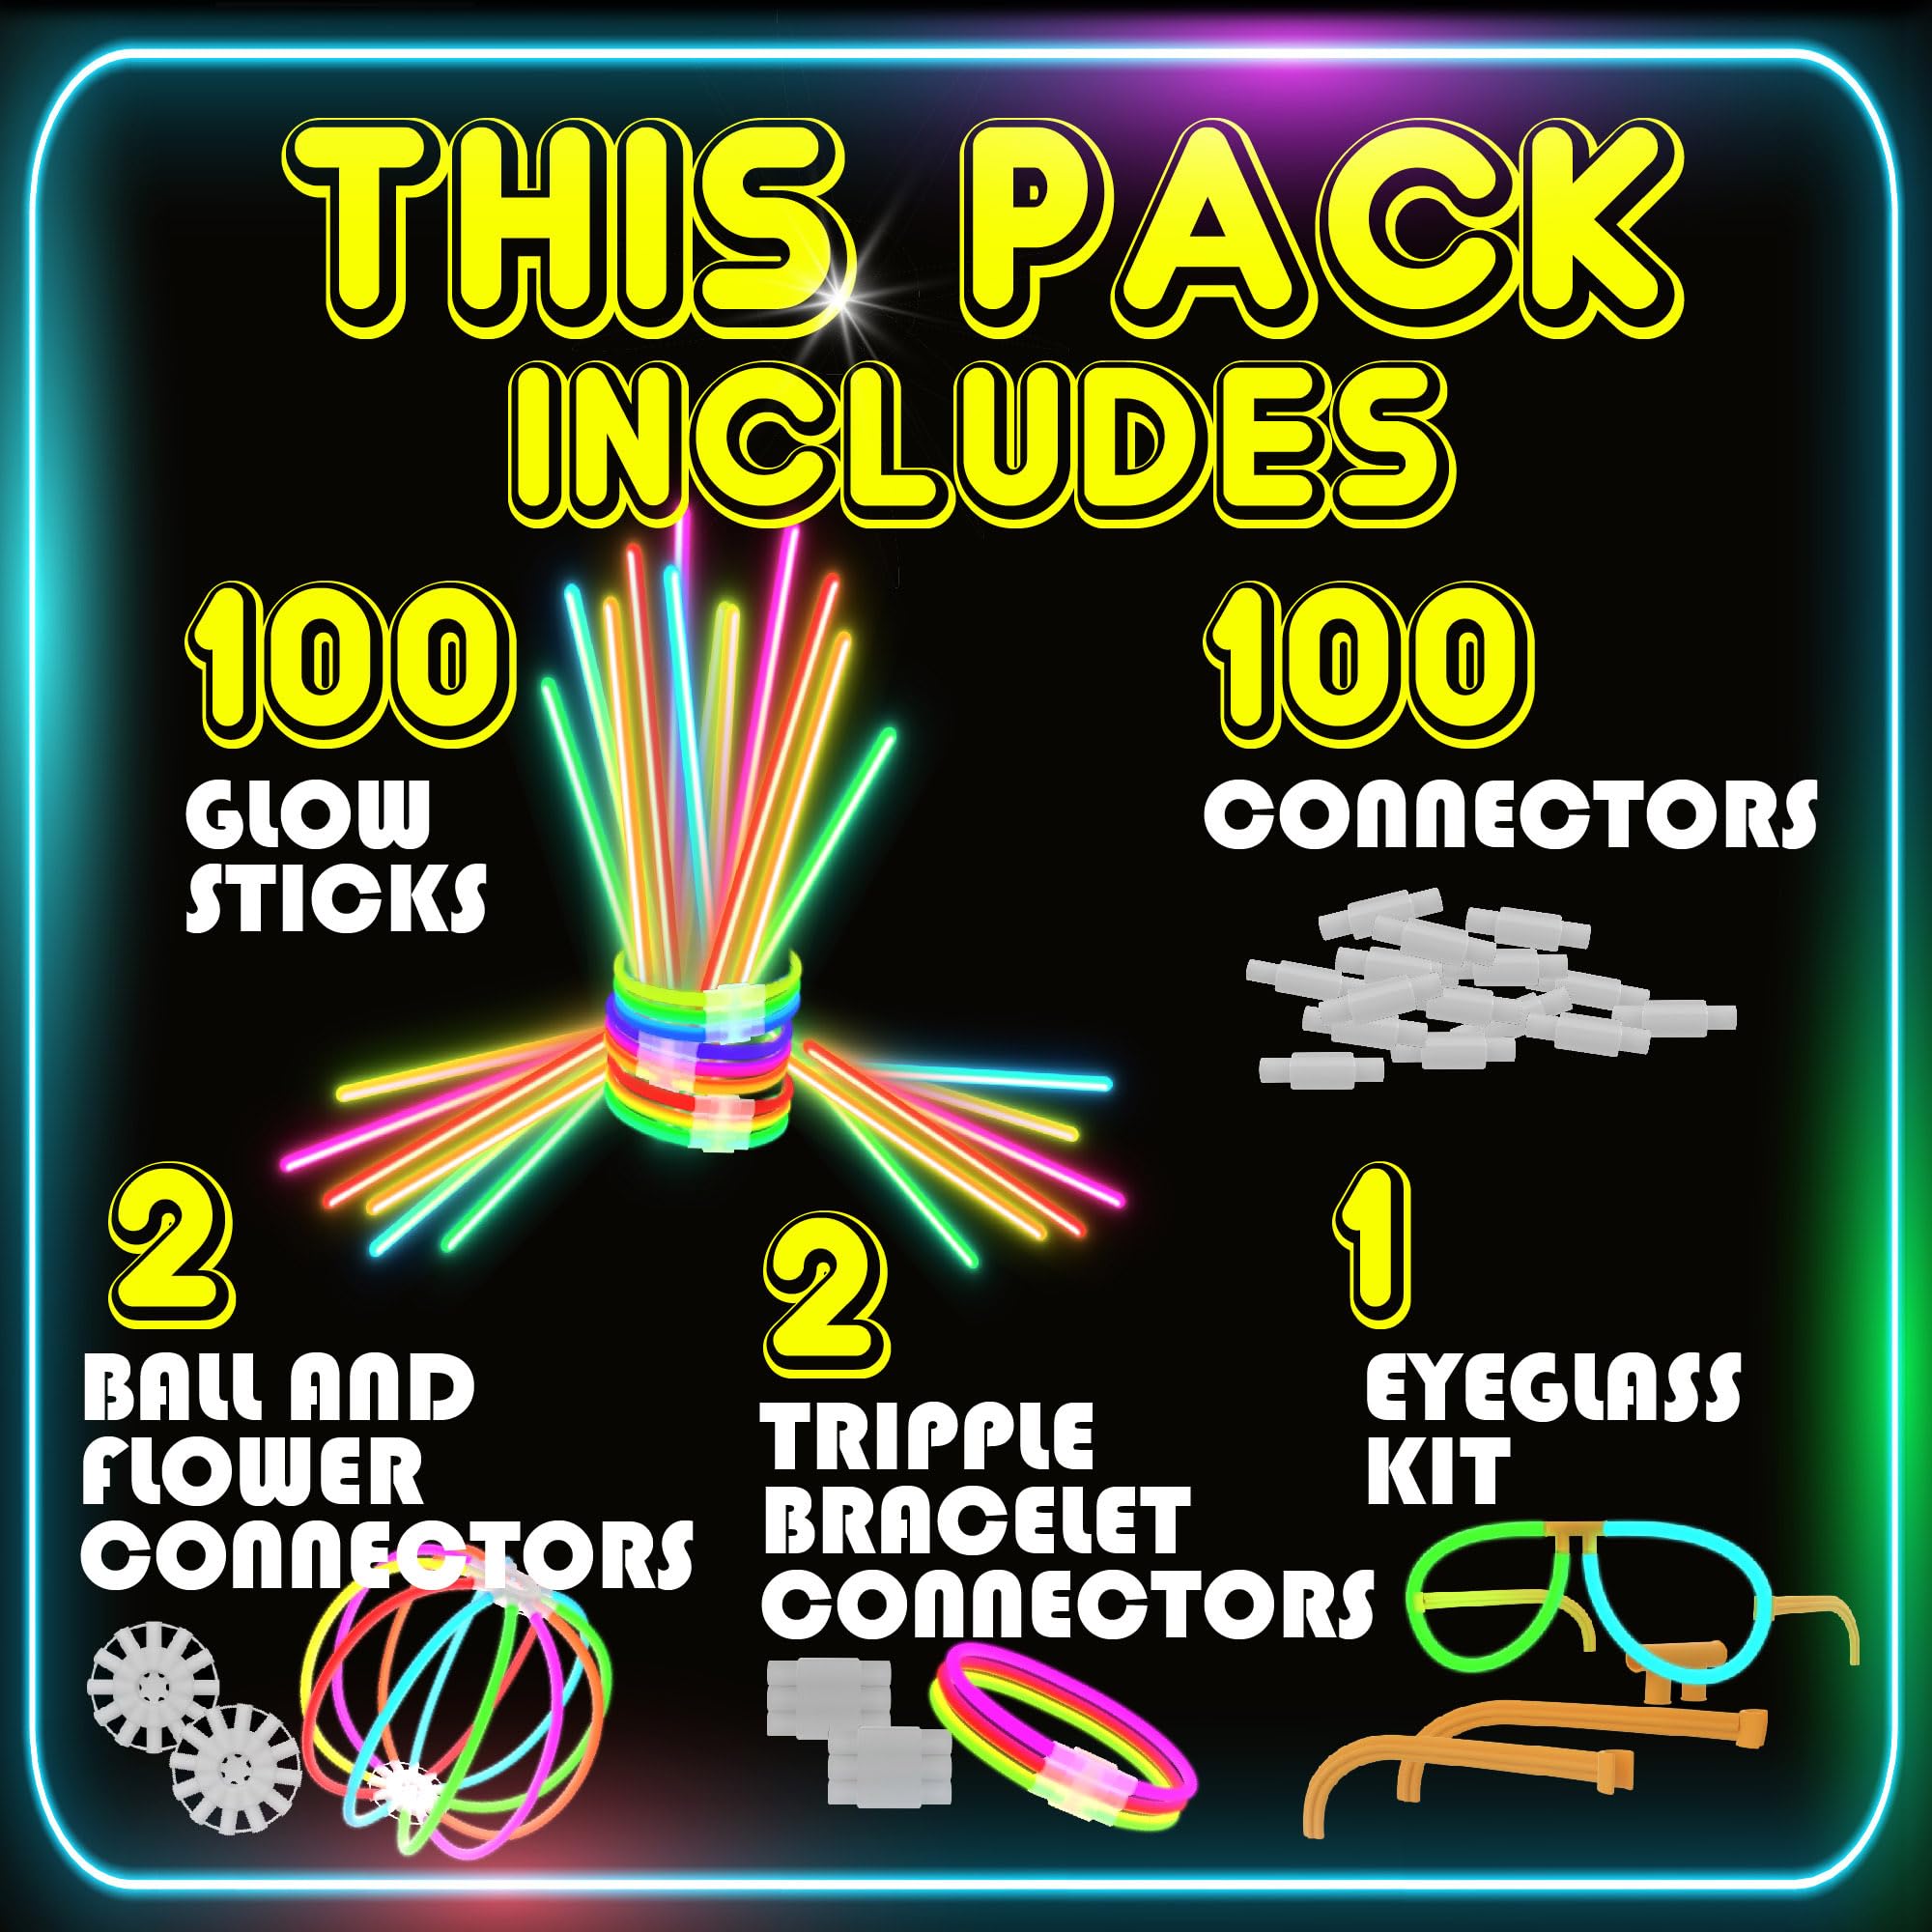 PartySticks Bulk Party Supplies 205 Piece Glow in The Dark 100 Glow Sticks with Eye Glasses, Bracelets, and Connectors